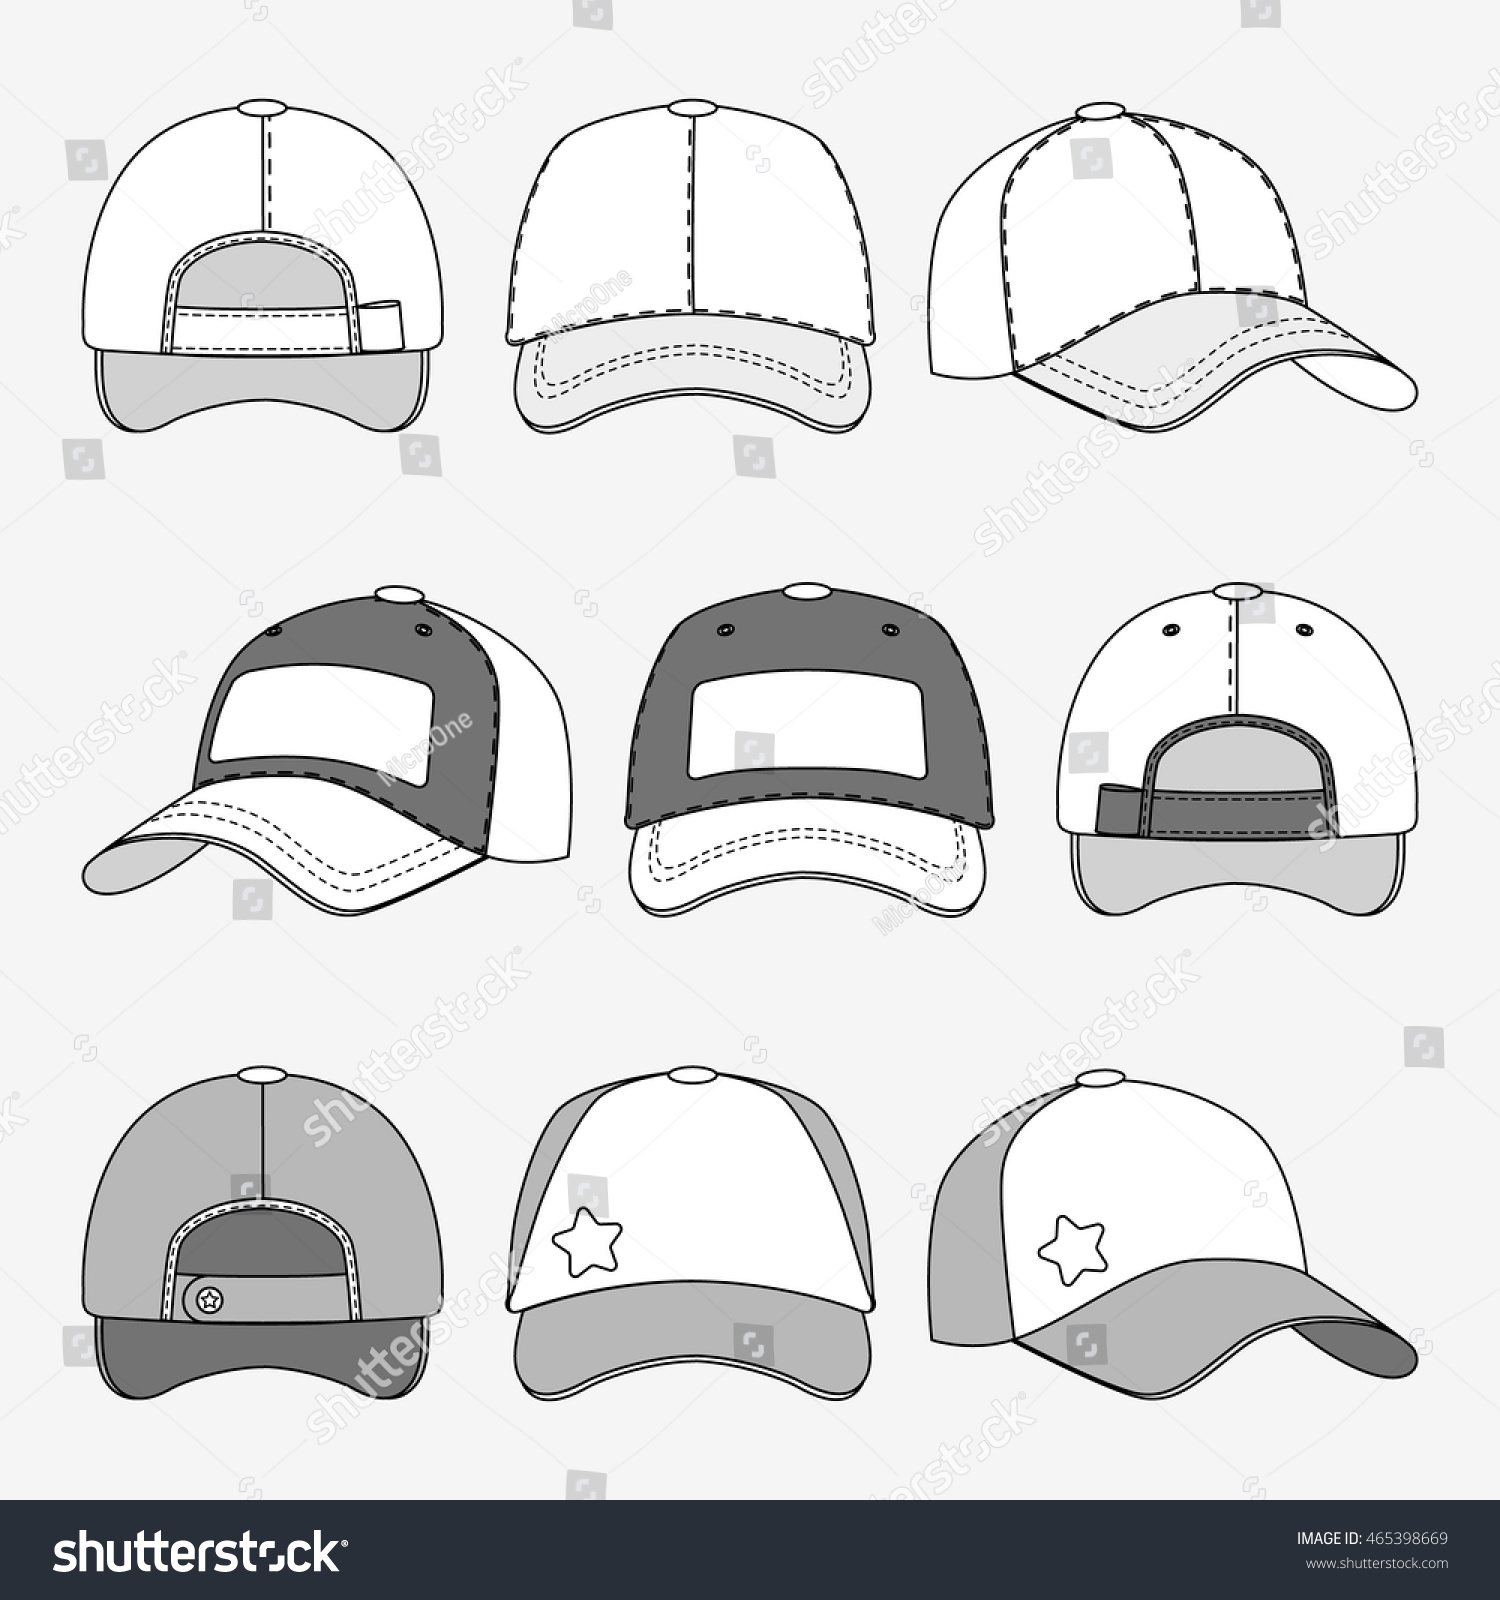 Baseball Cap Front Back Side View Stock Vector (Royalty Free) 465398669 ...